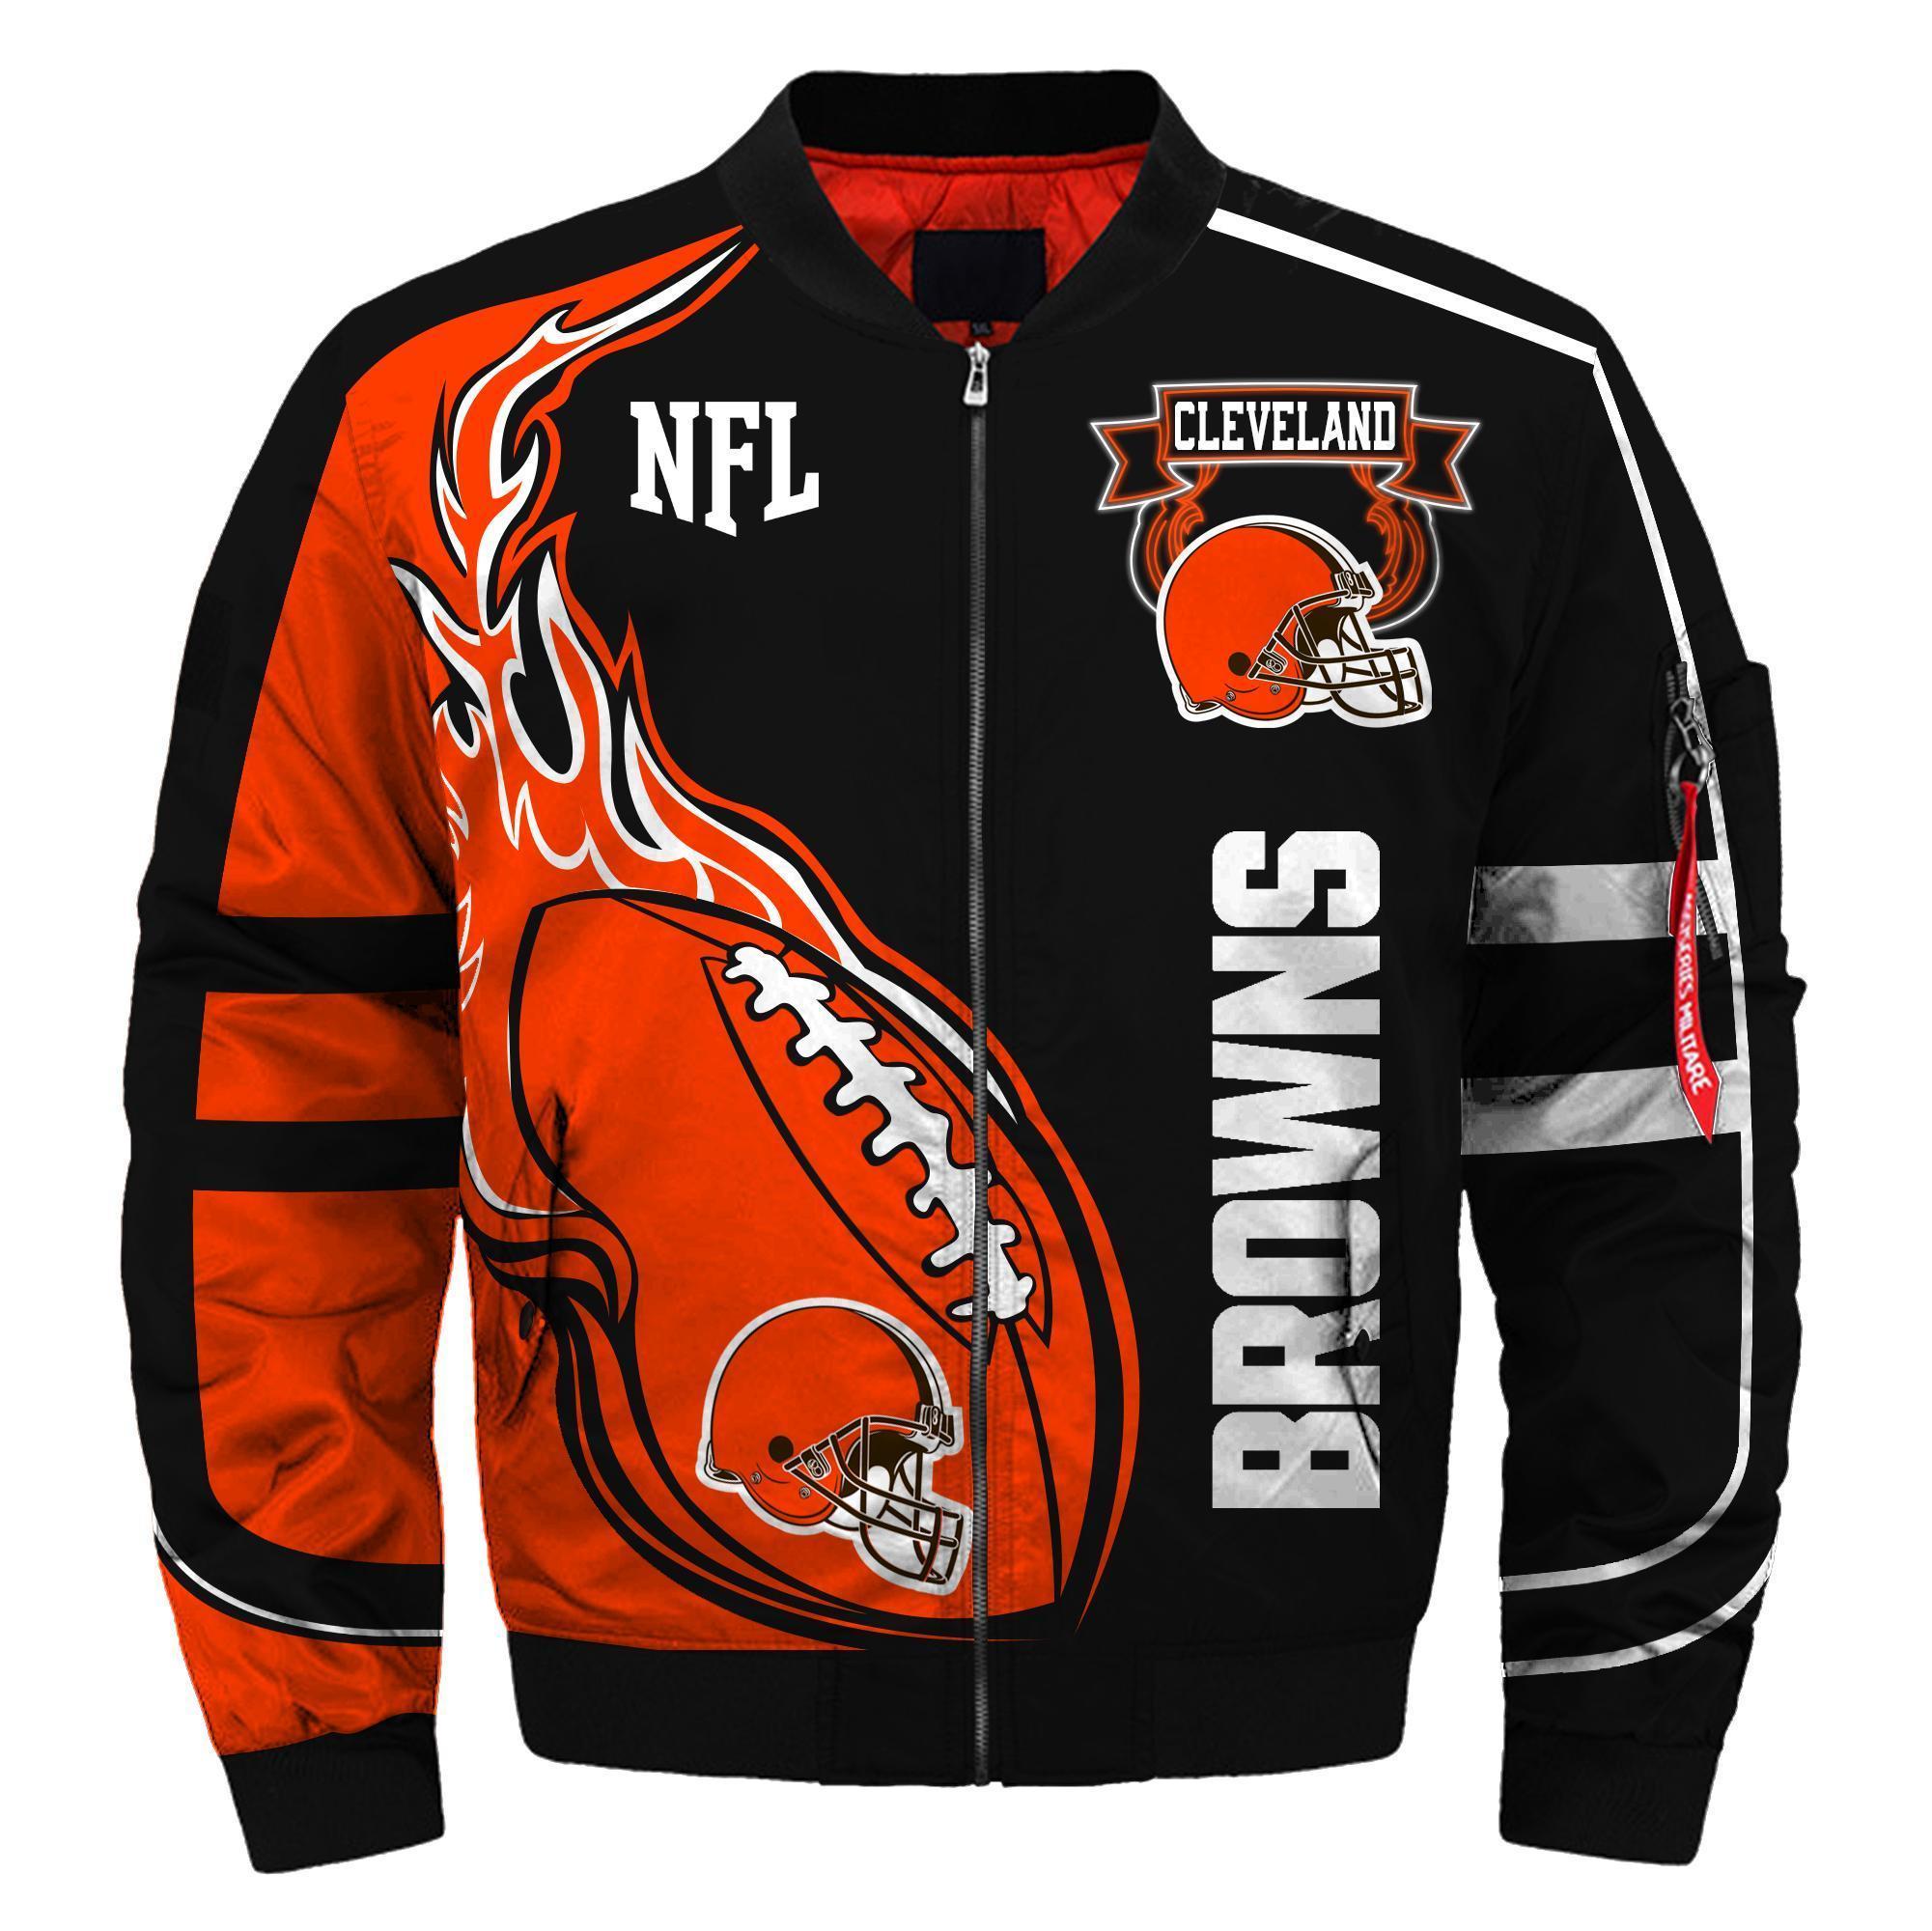 007 Nfl Cleveland Browns Custom North Face Winter Jacket Bomer High Quality Plus Size Jacket